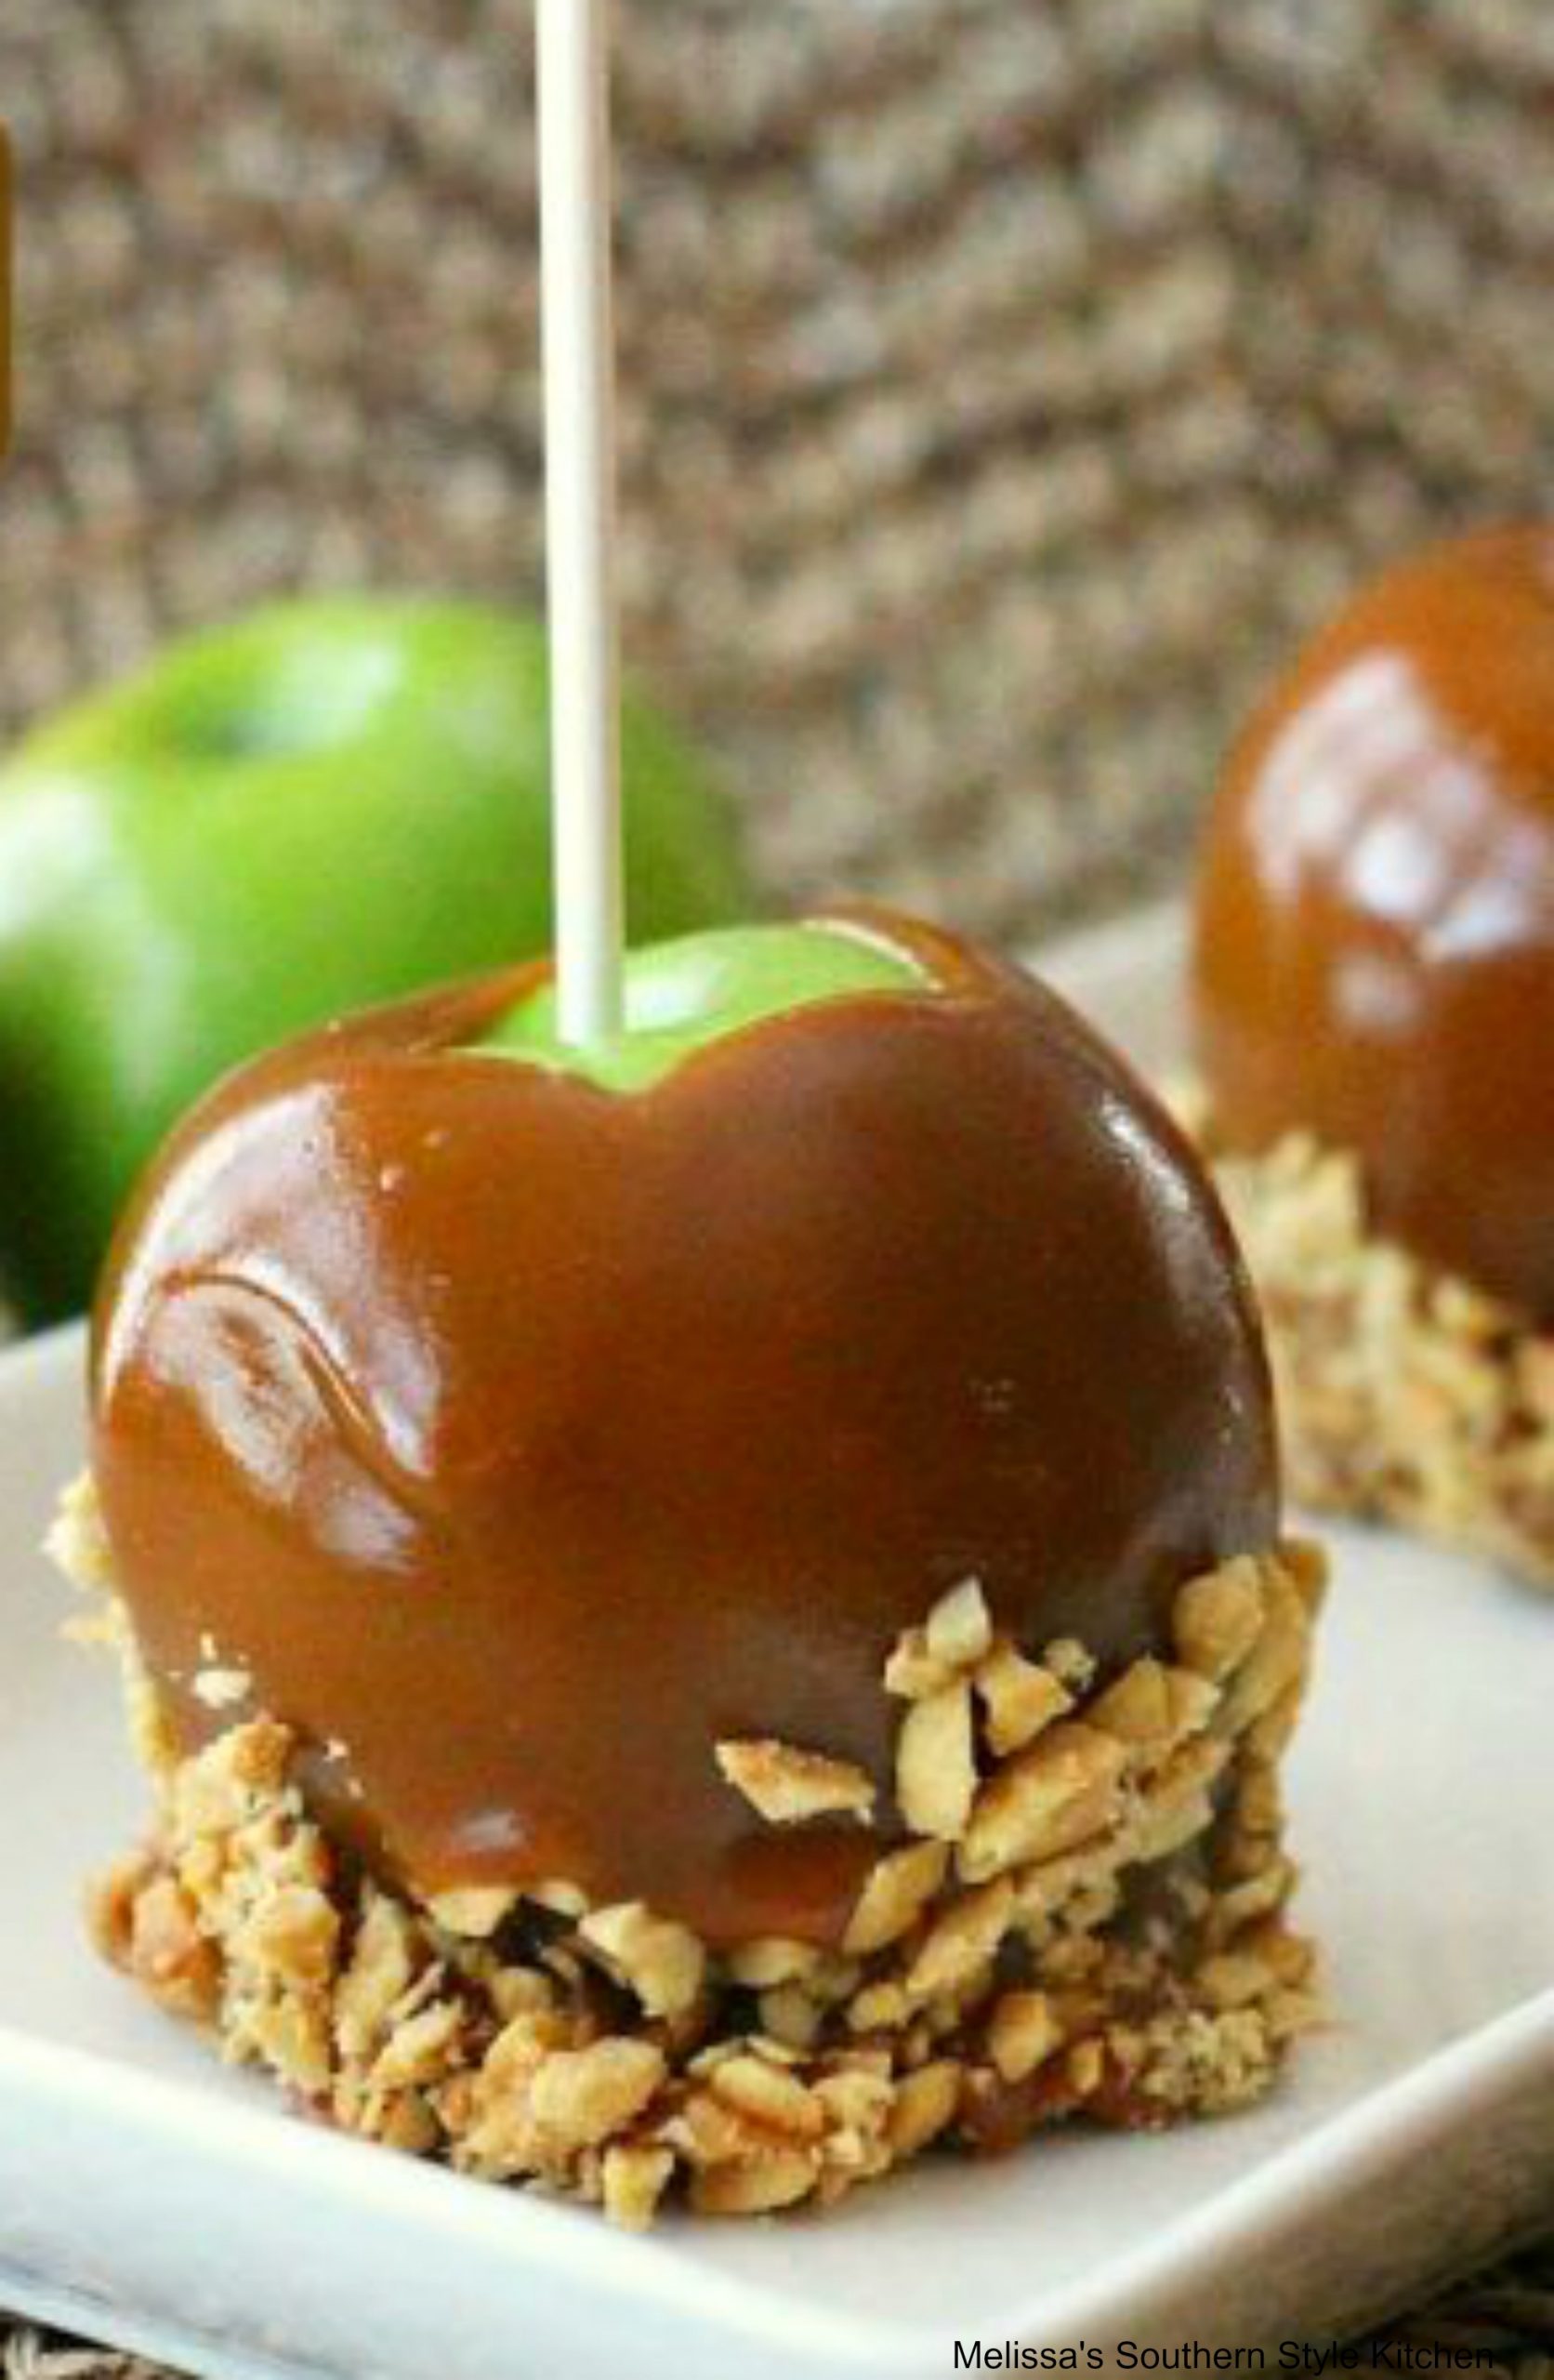 The Perfect Homemade Caramel Dipped Apples